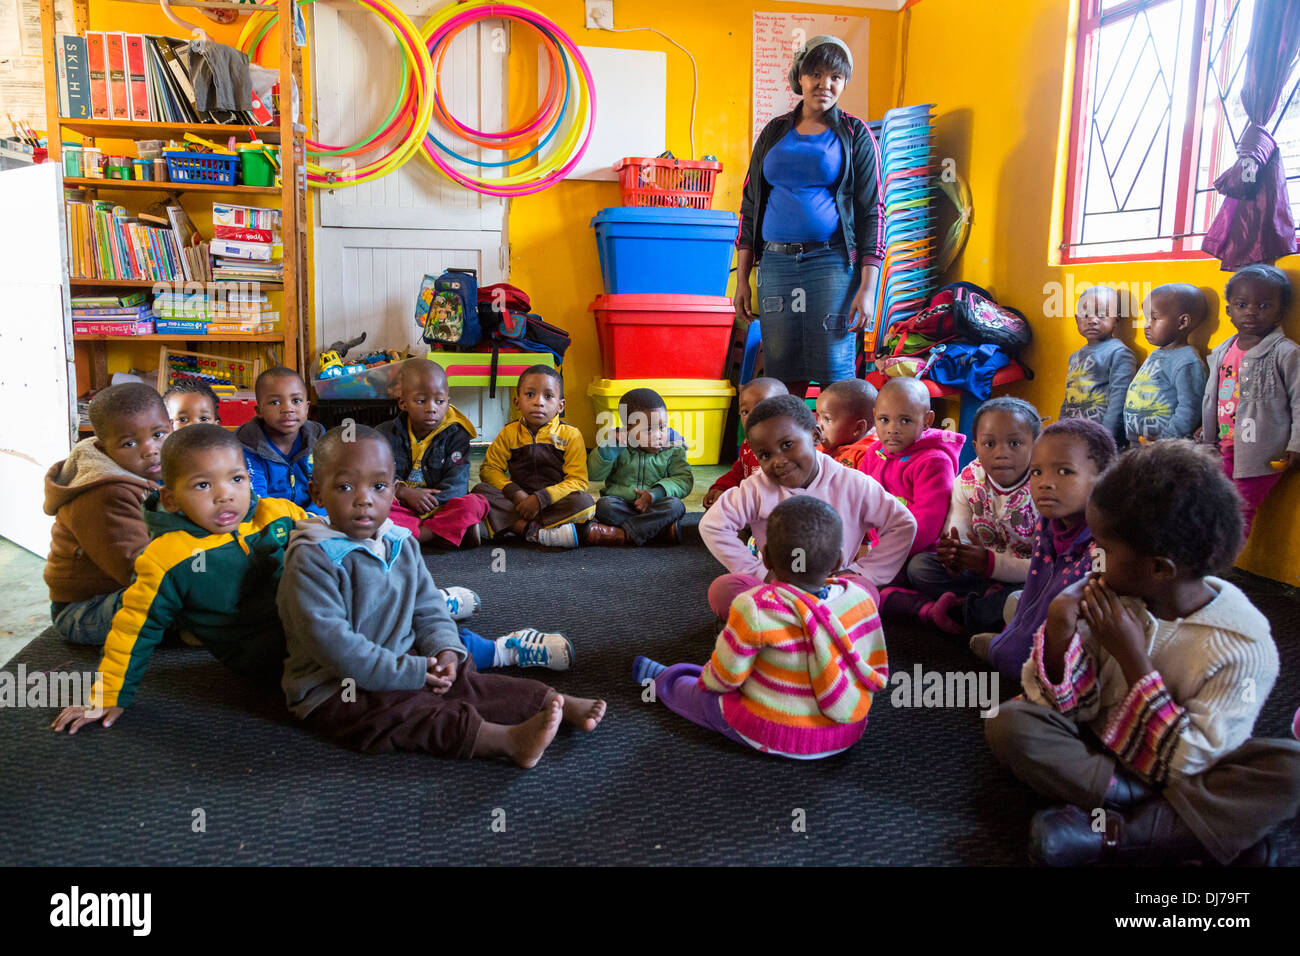 South Africa, Cape Town. Day-care Facility for Young Children. Stock Photo